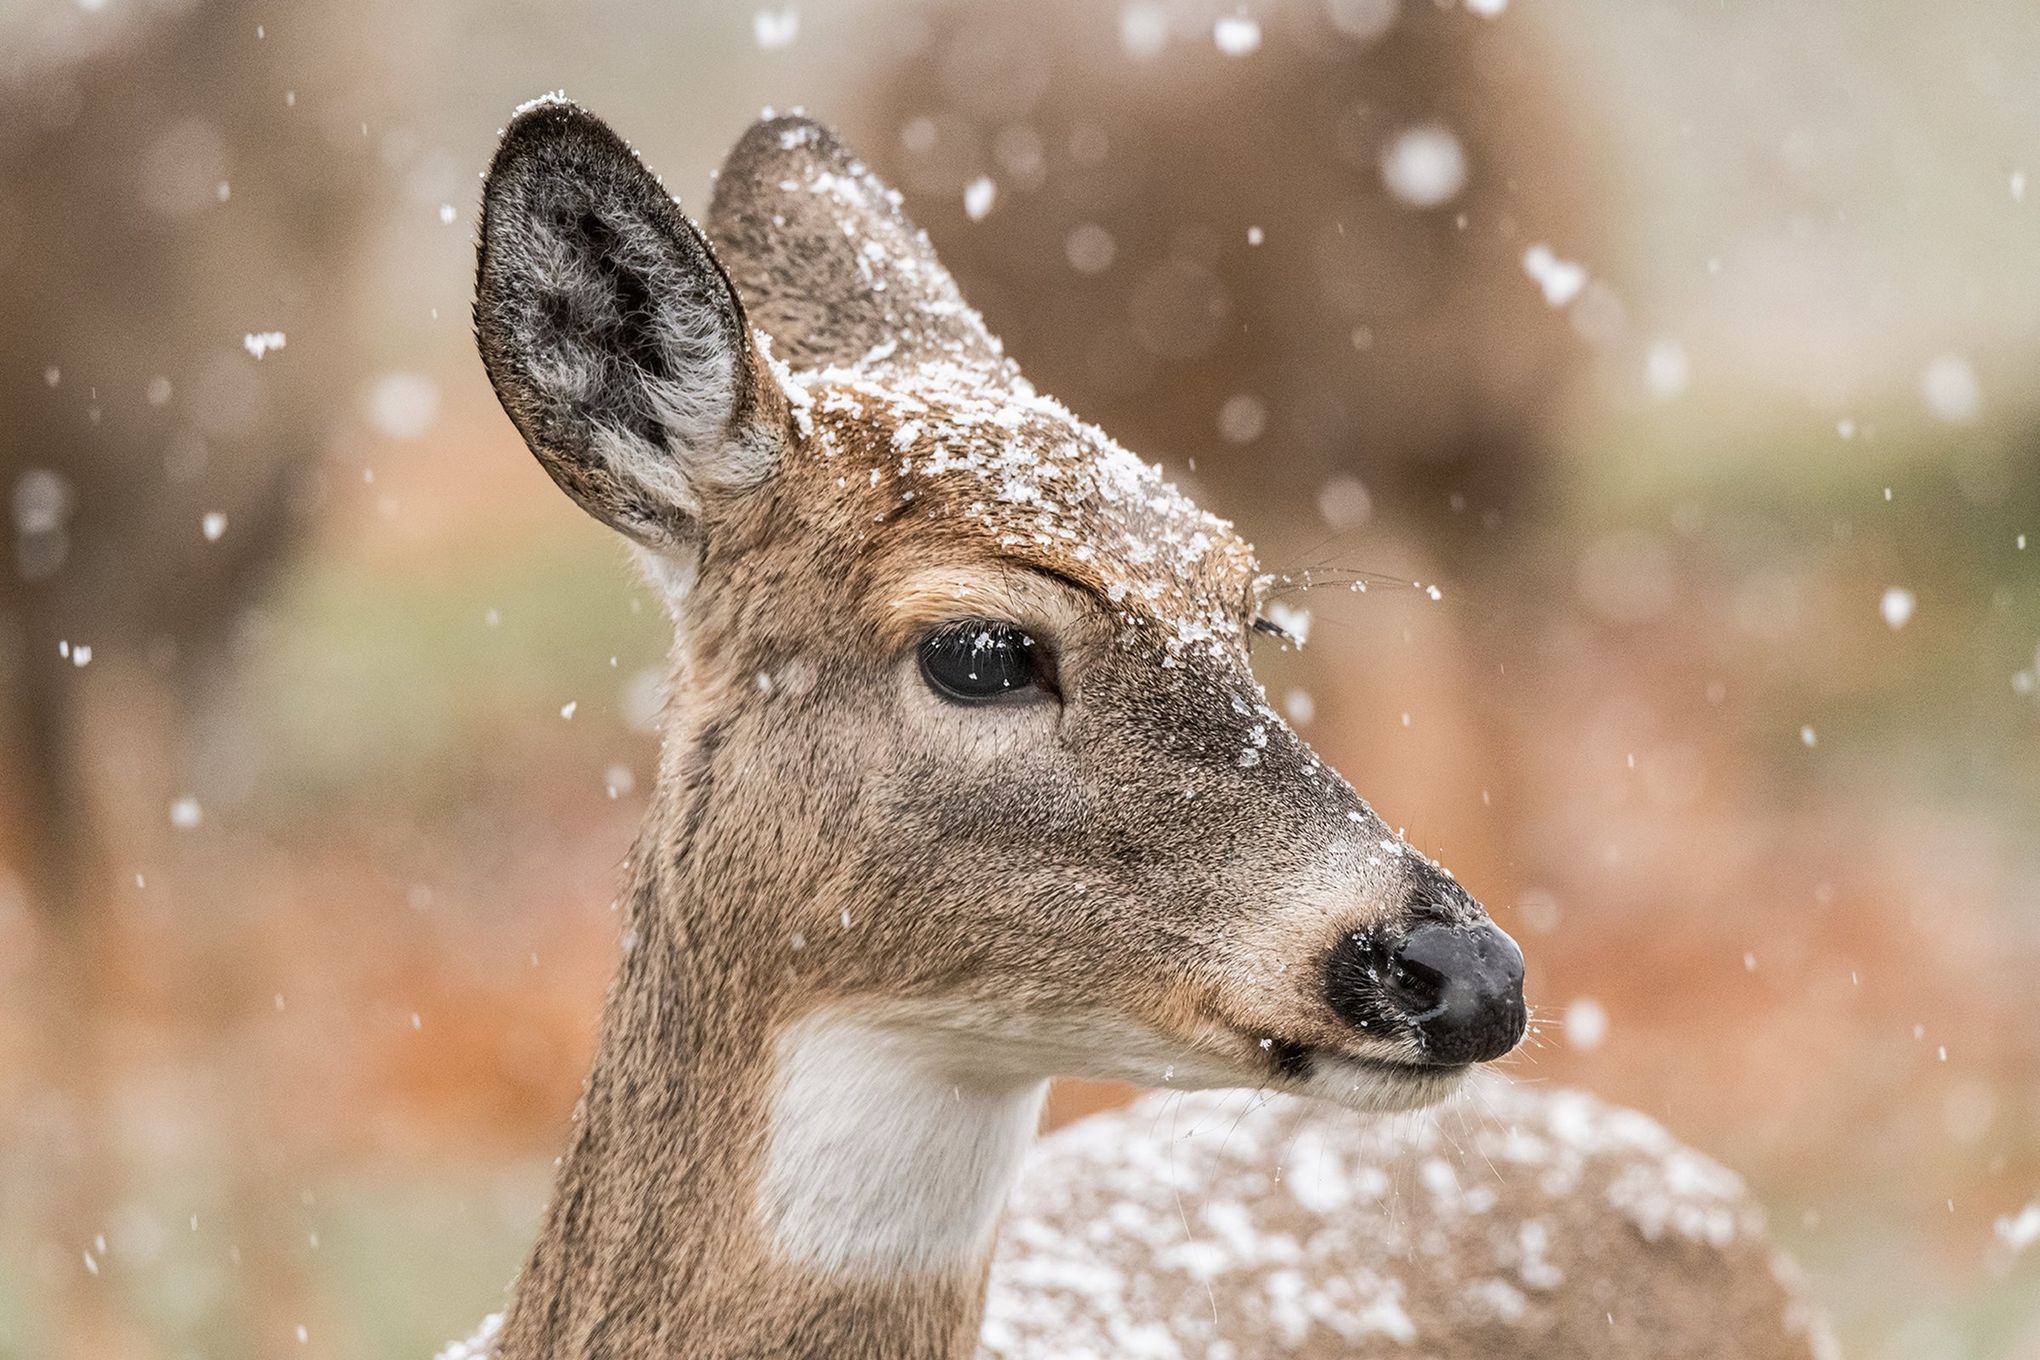 This snowy white-tailed deer is cute enough to melt the chill of winter